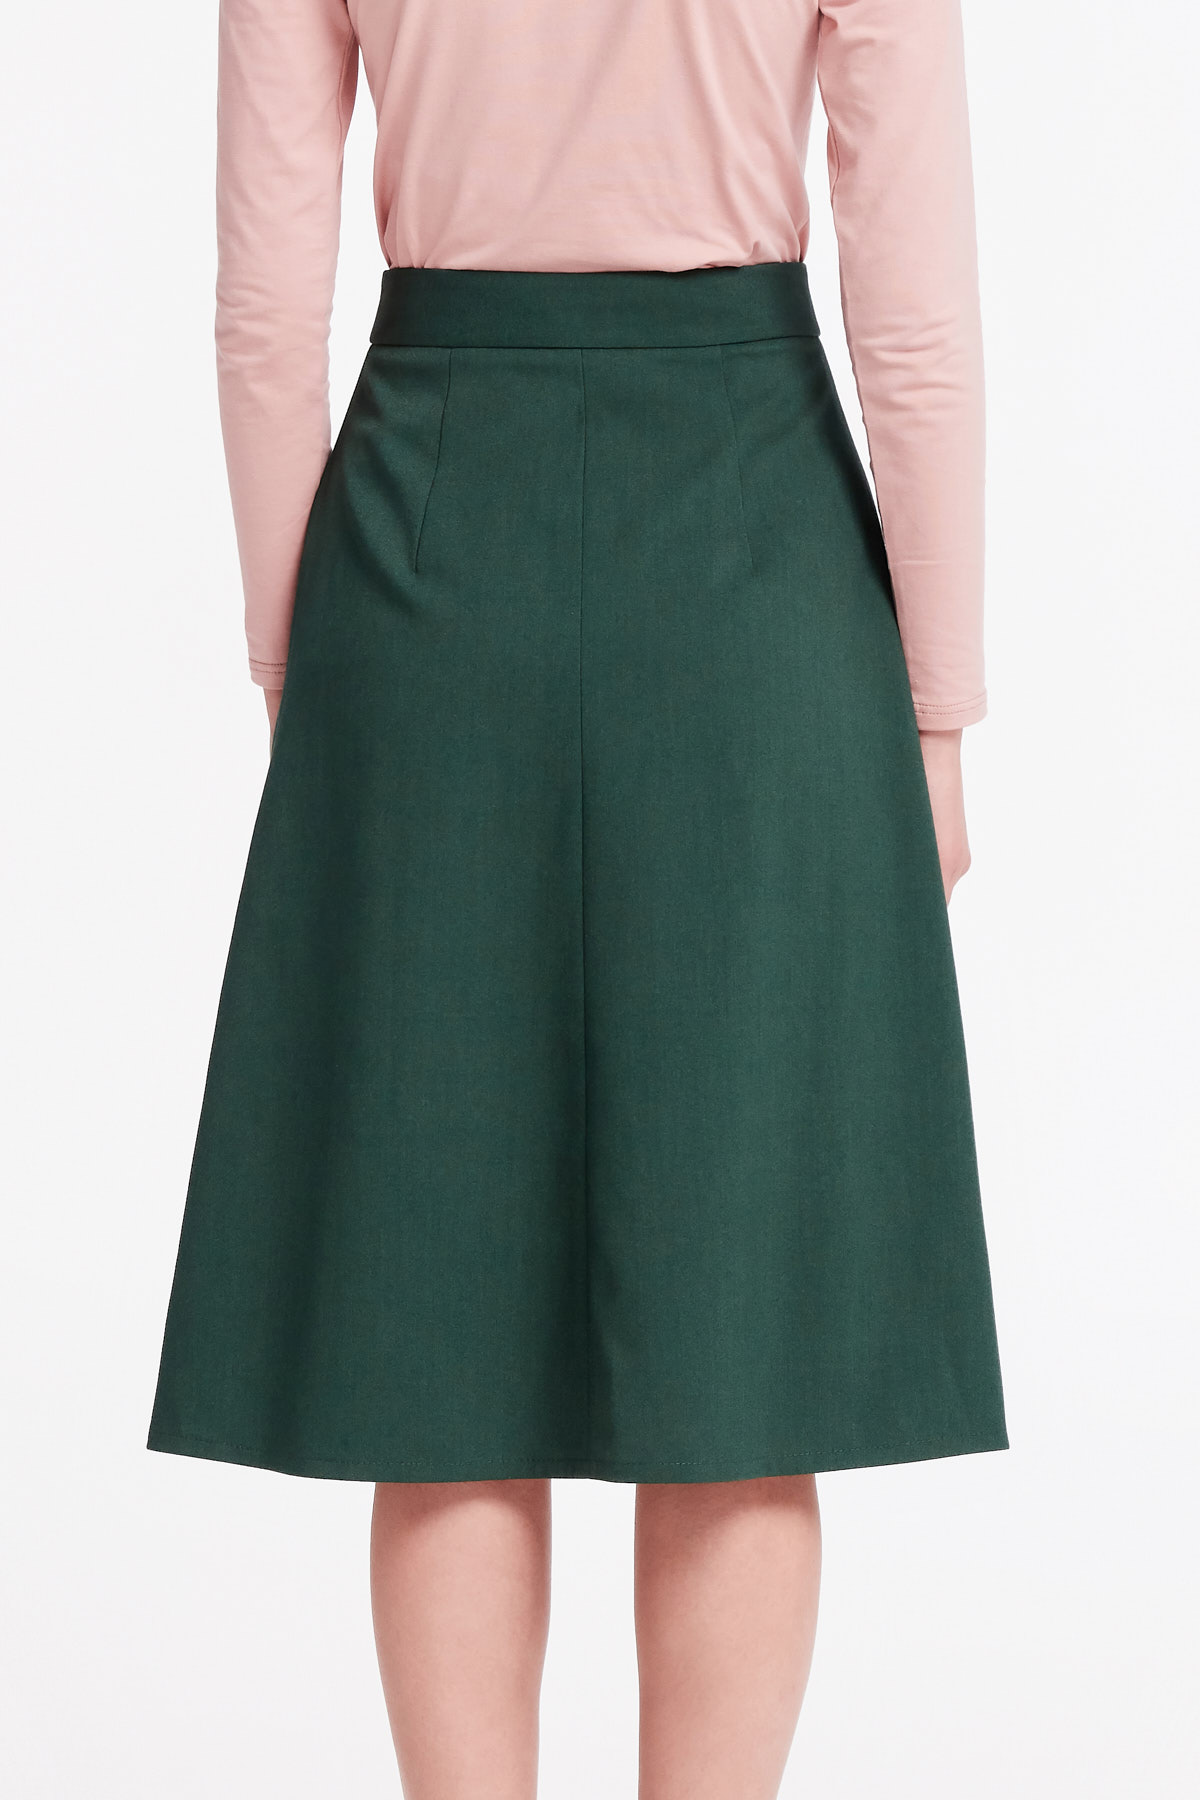 Green midi dress with a front zip, photo 7